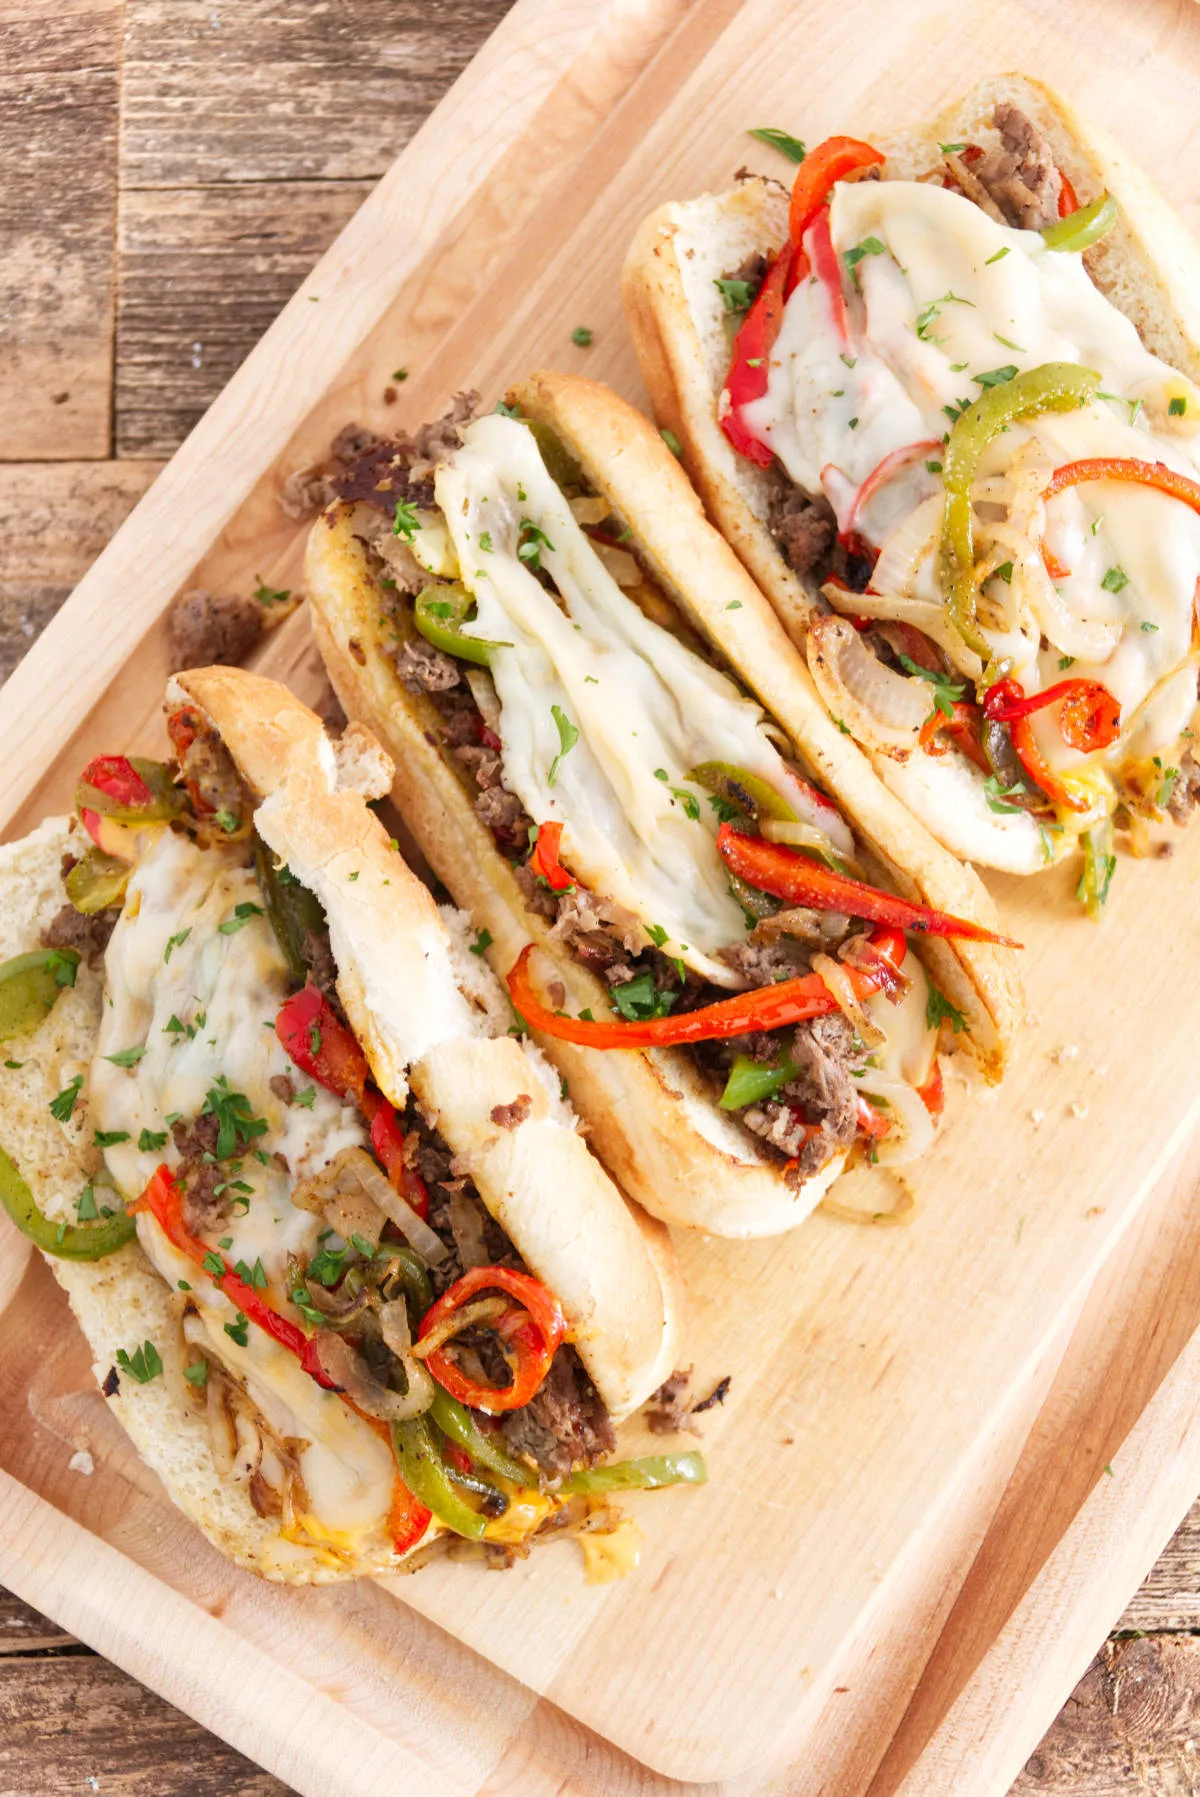 three philly cheesesteak sandwiches laid out on cutting board, each one filled with steak, red and green peppers, melted provolone, and cheese whiz